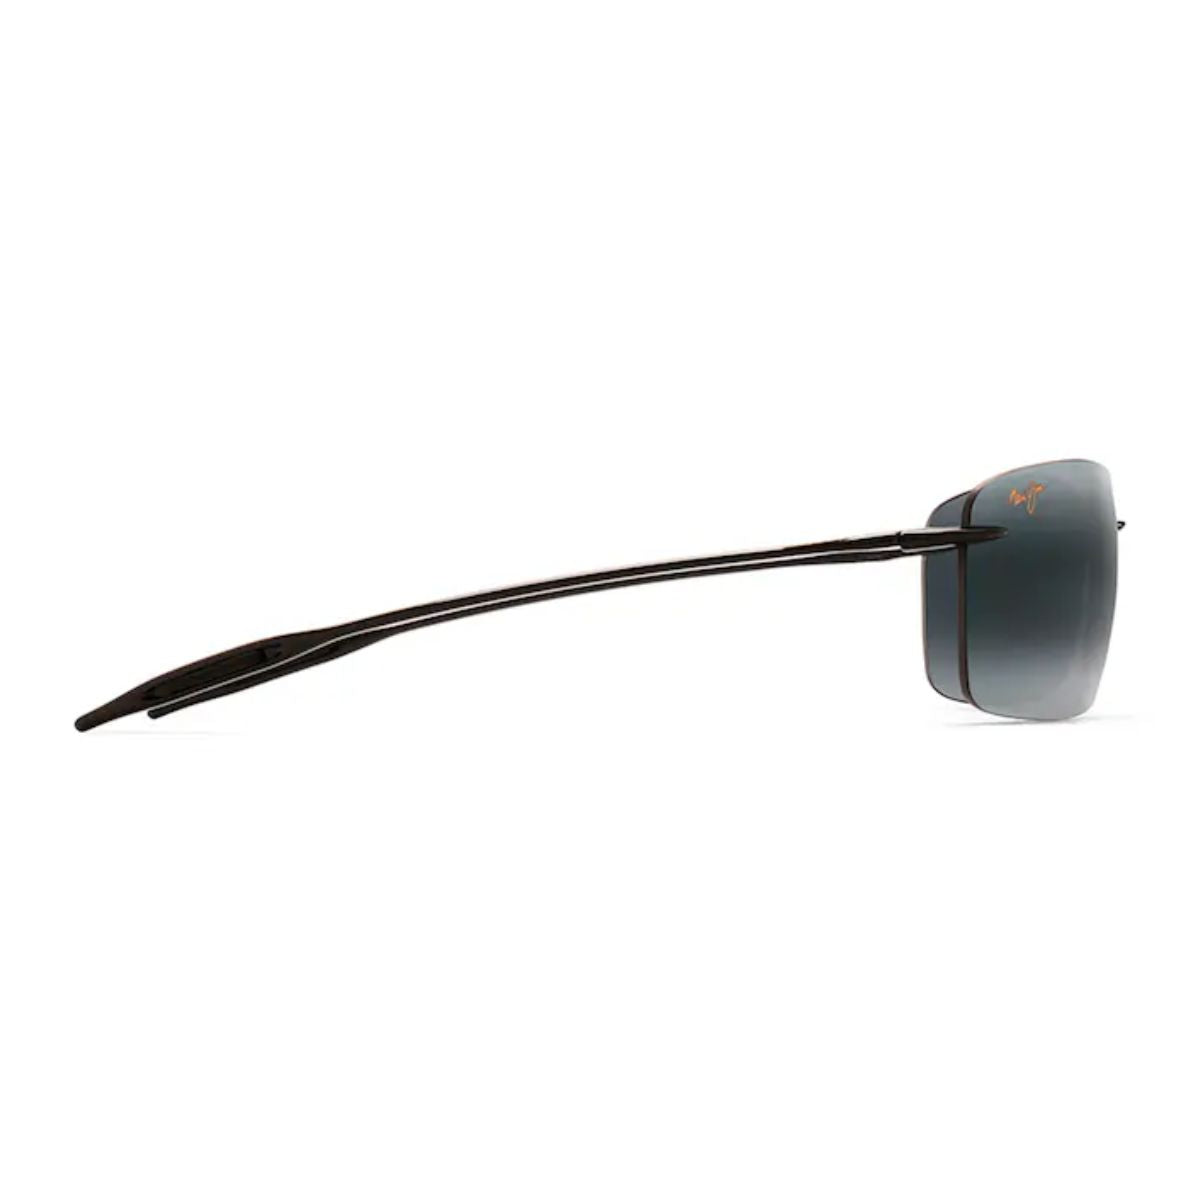 "Buy Trdning Maui jim Goggles For Men's India | Offer Sunglasess At Optorium Online Store"